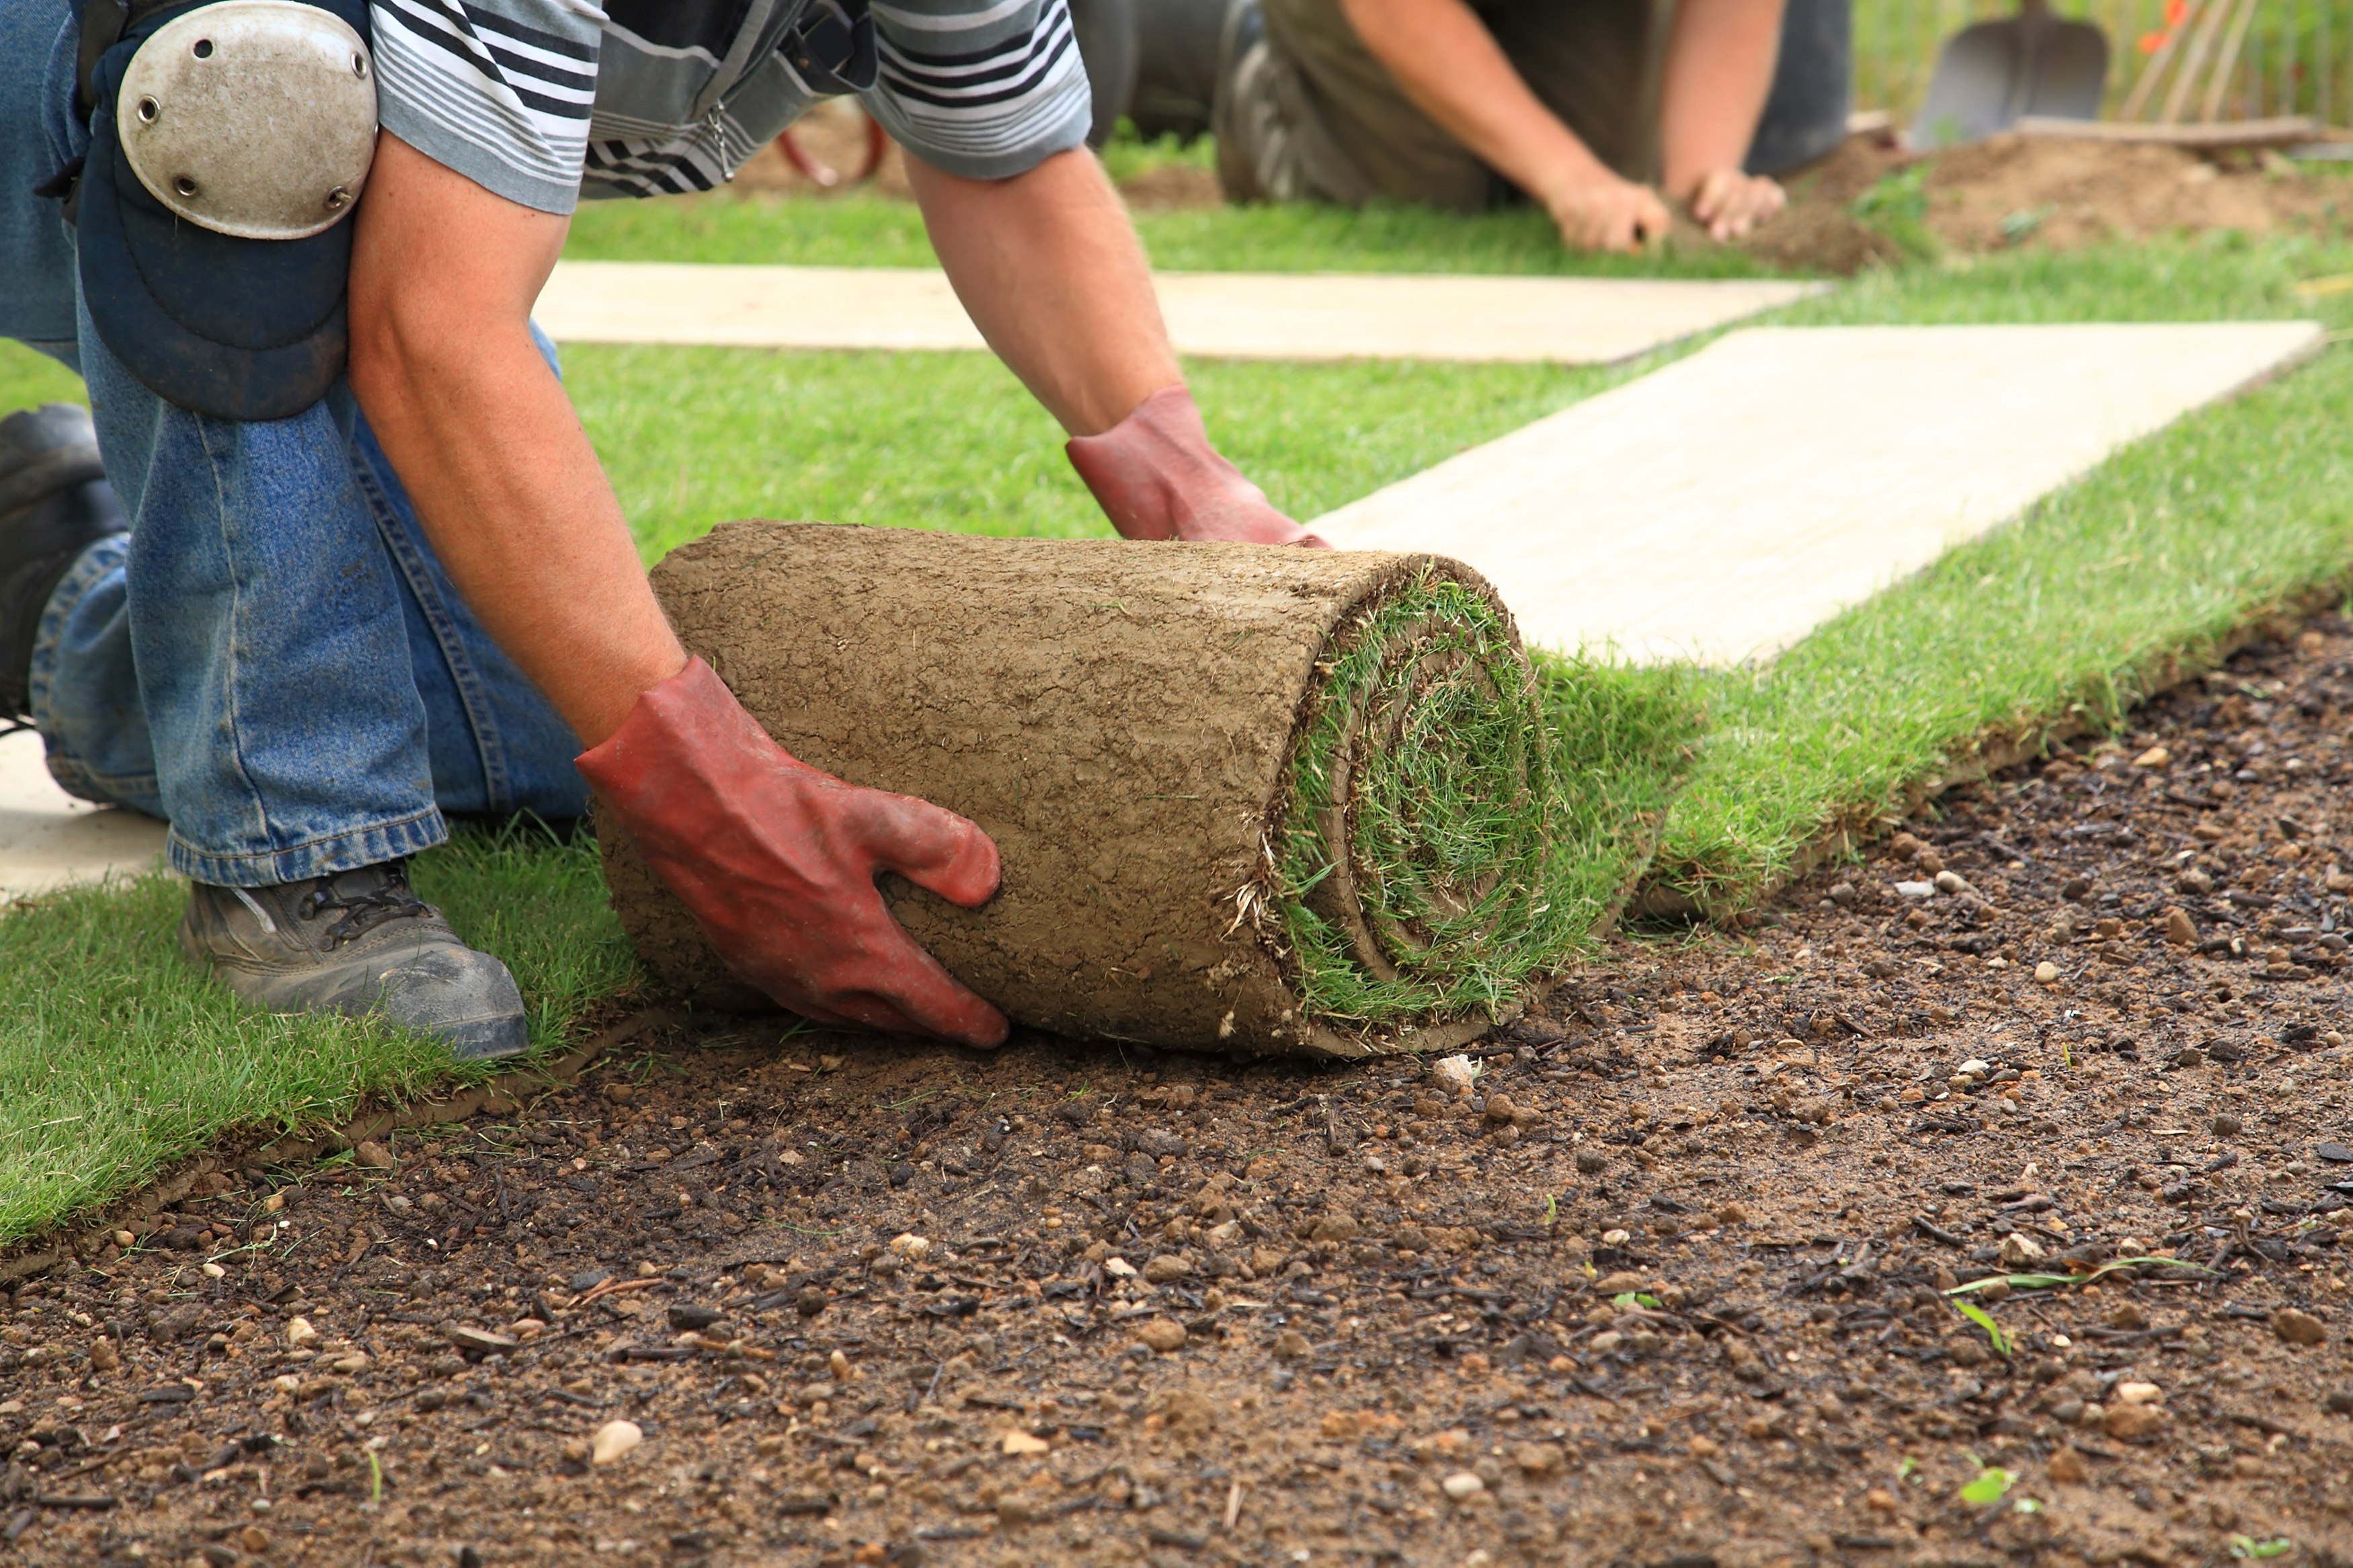 photodune-1198069-laying-sod-for-new-lawn-l